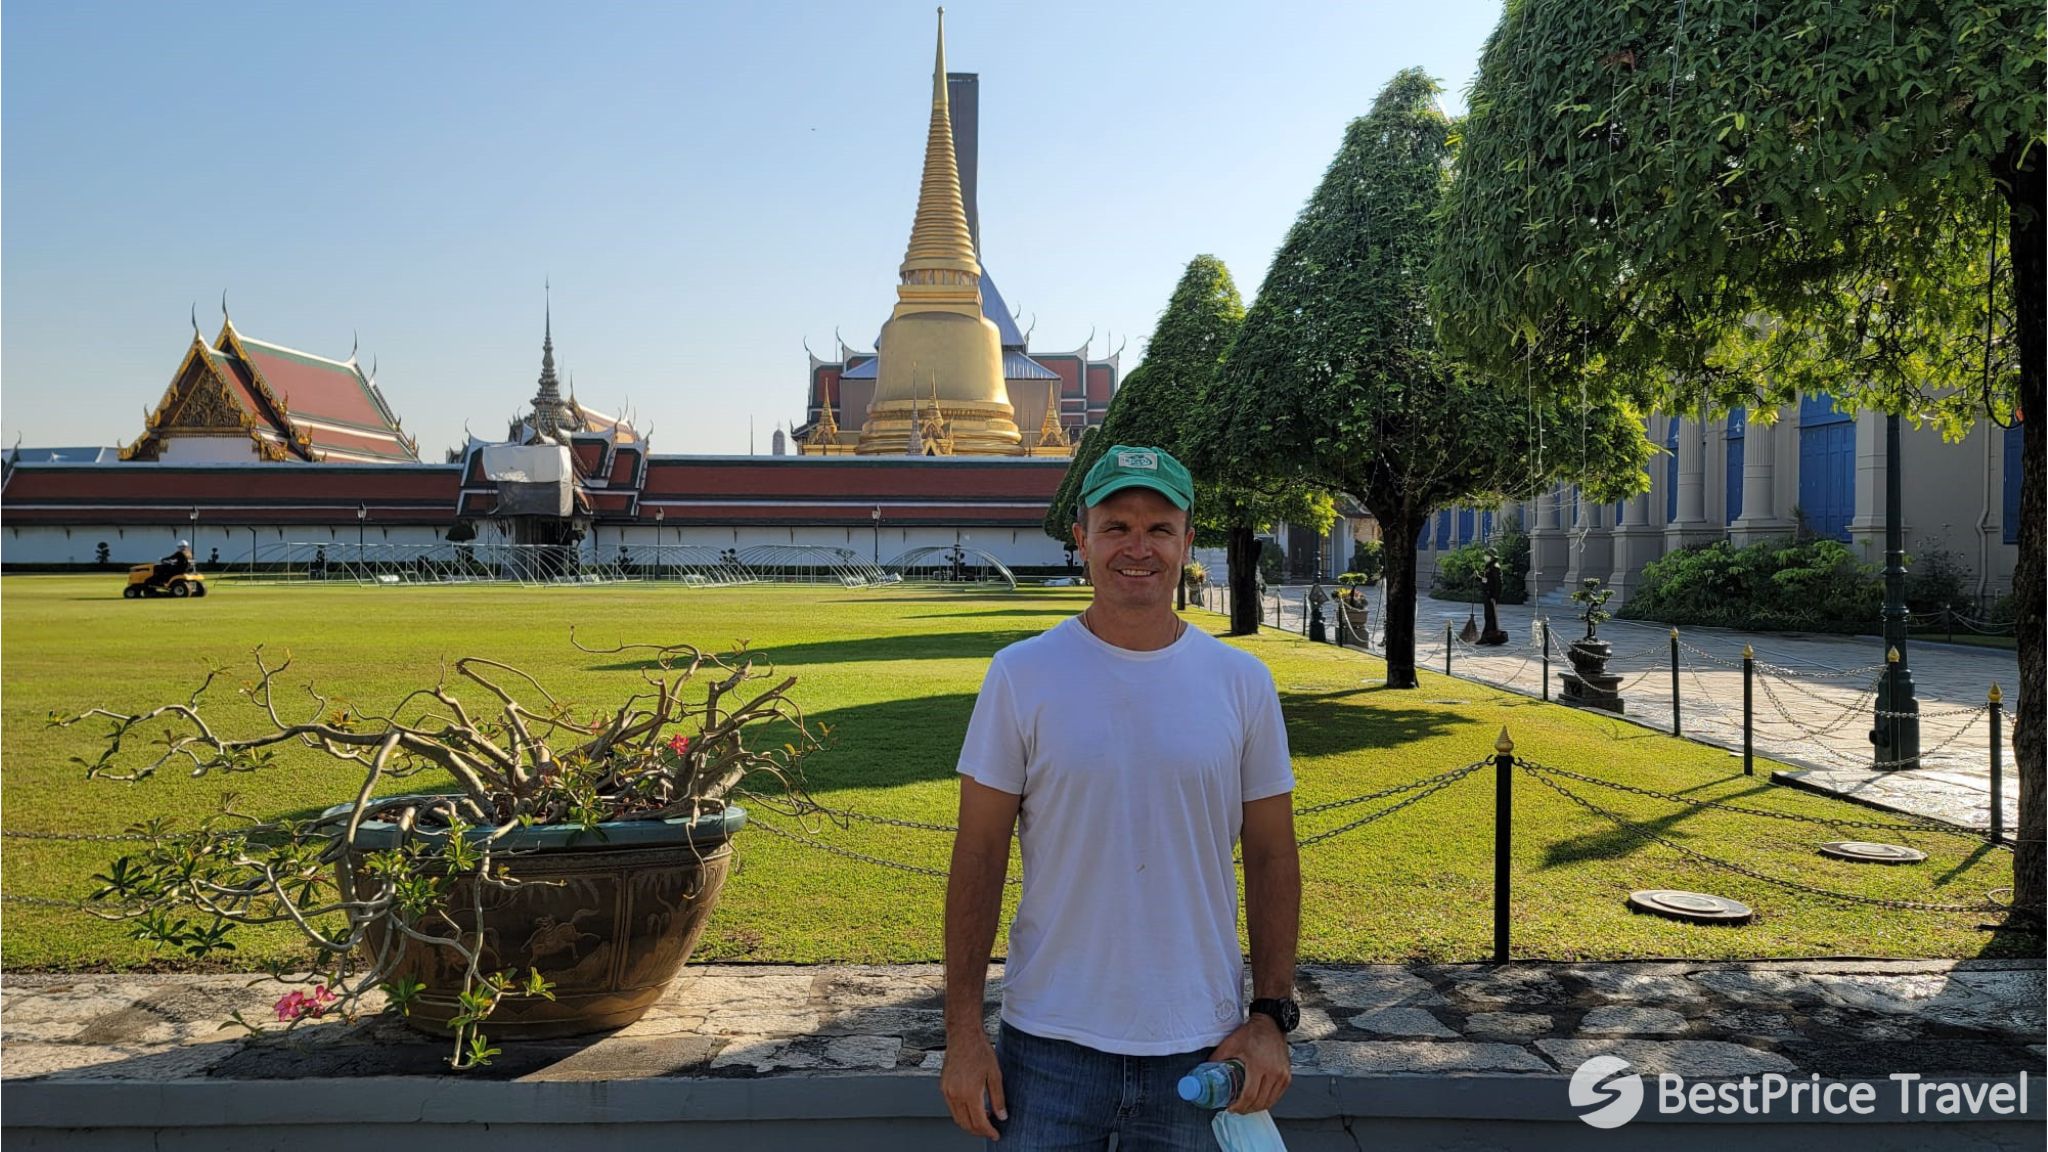 Day 2 Visit The Grand Palace A Complex Of Buildings At The Heart Of Bangkok